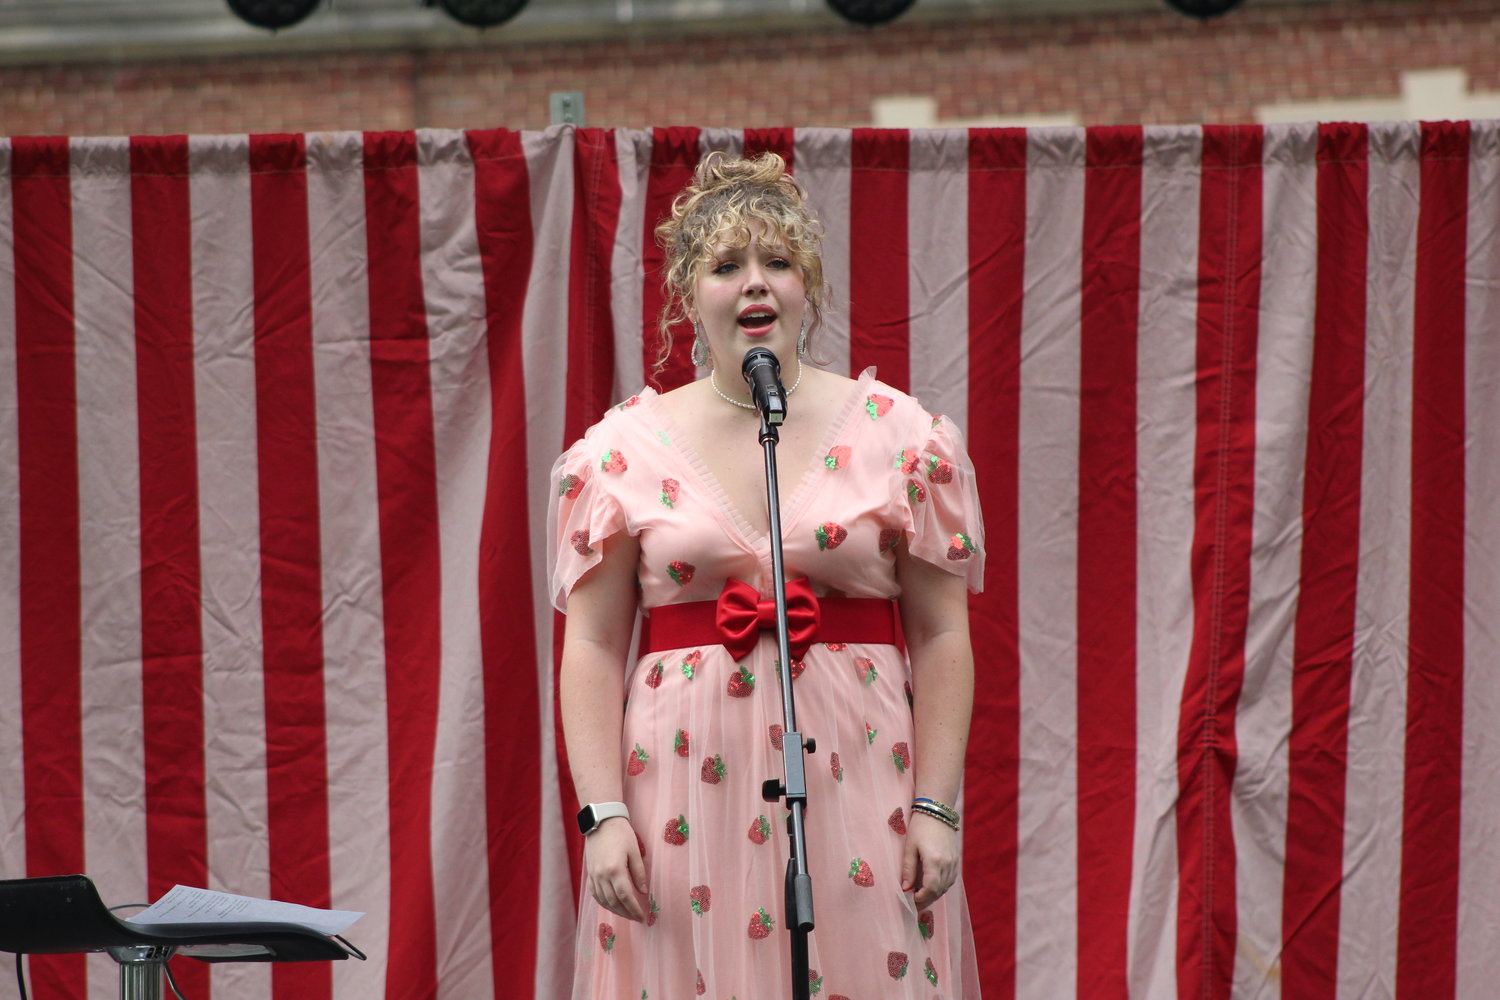 Tori Abston of Crawfordsville performs Friday on the festival stage.